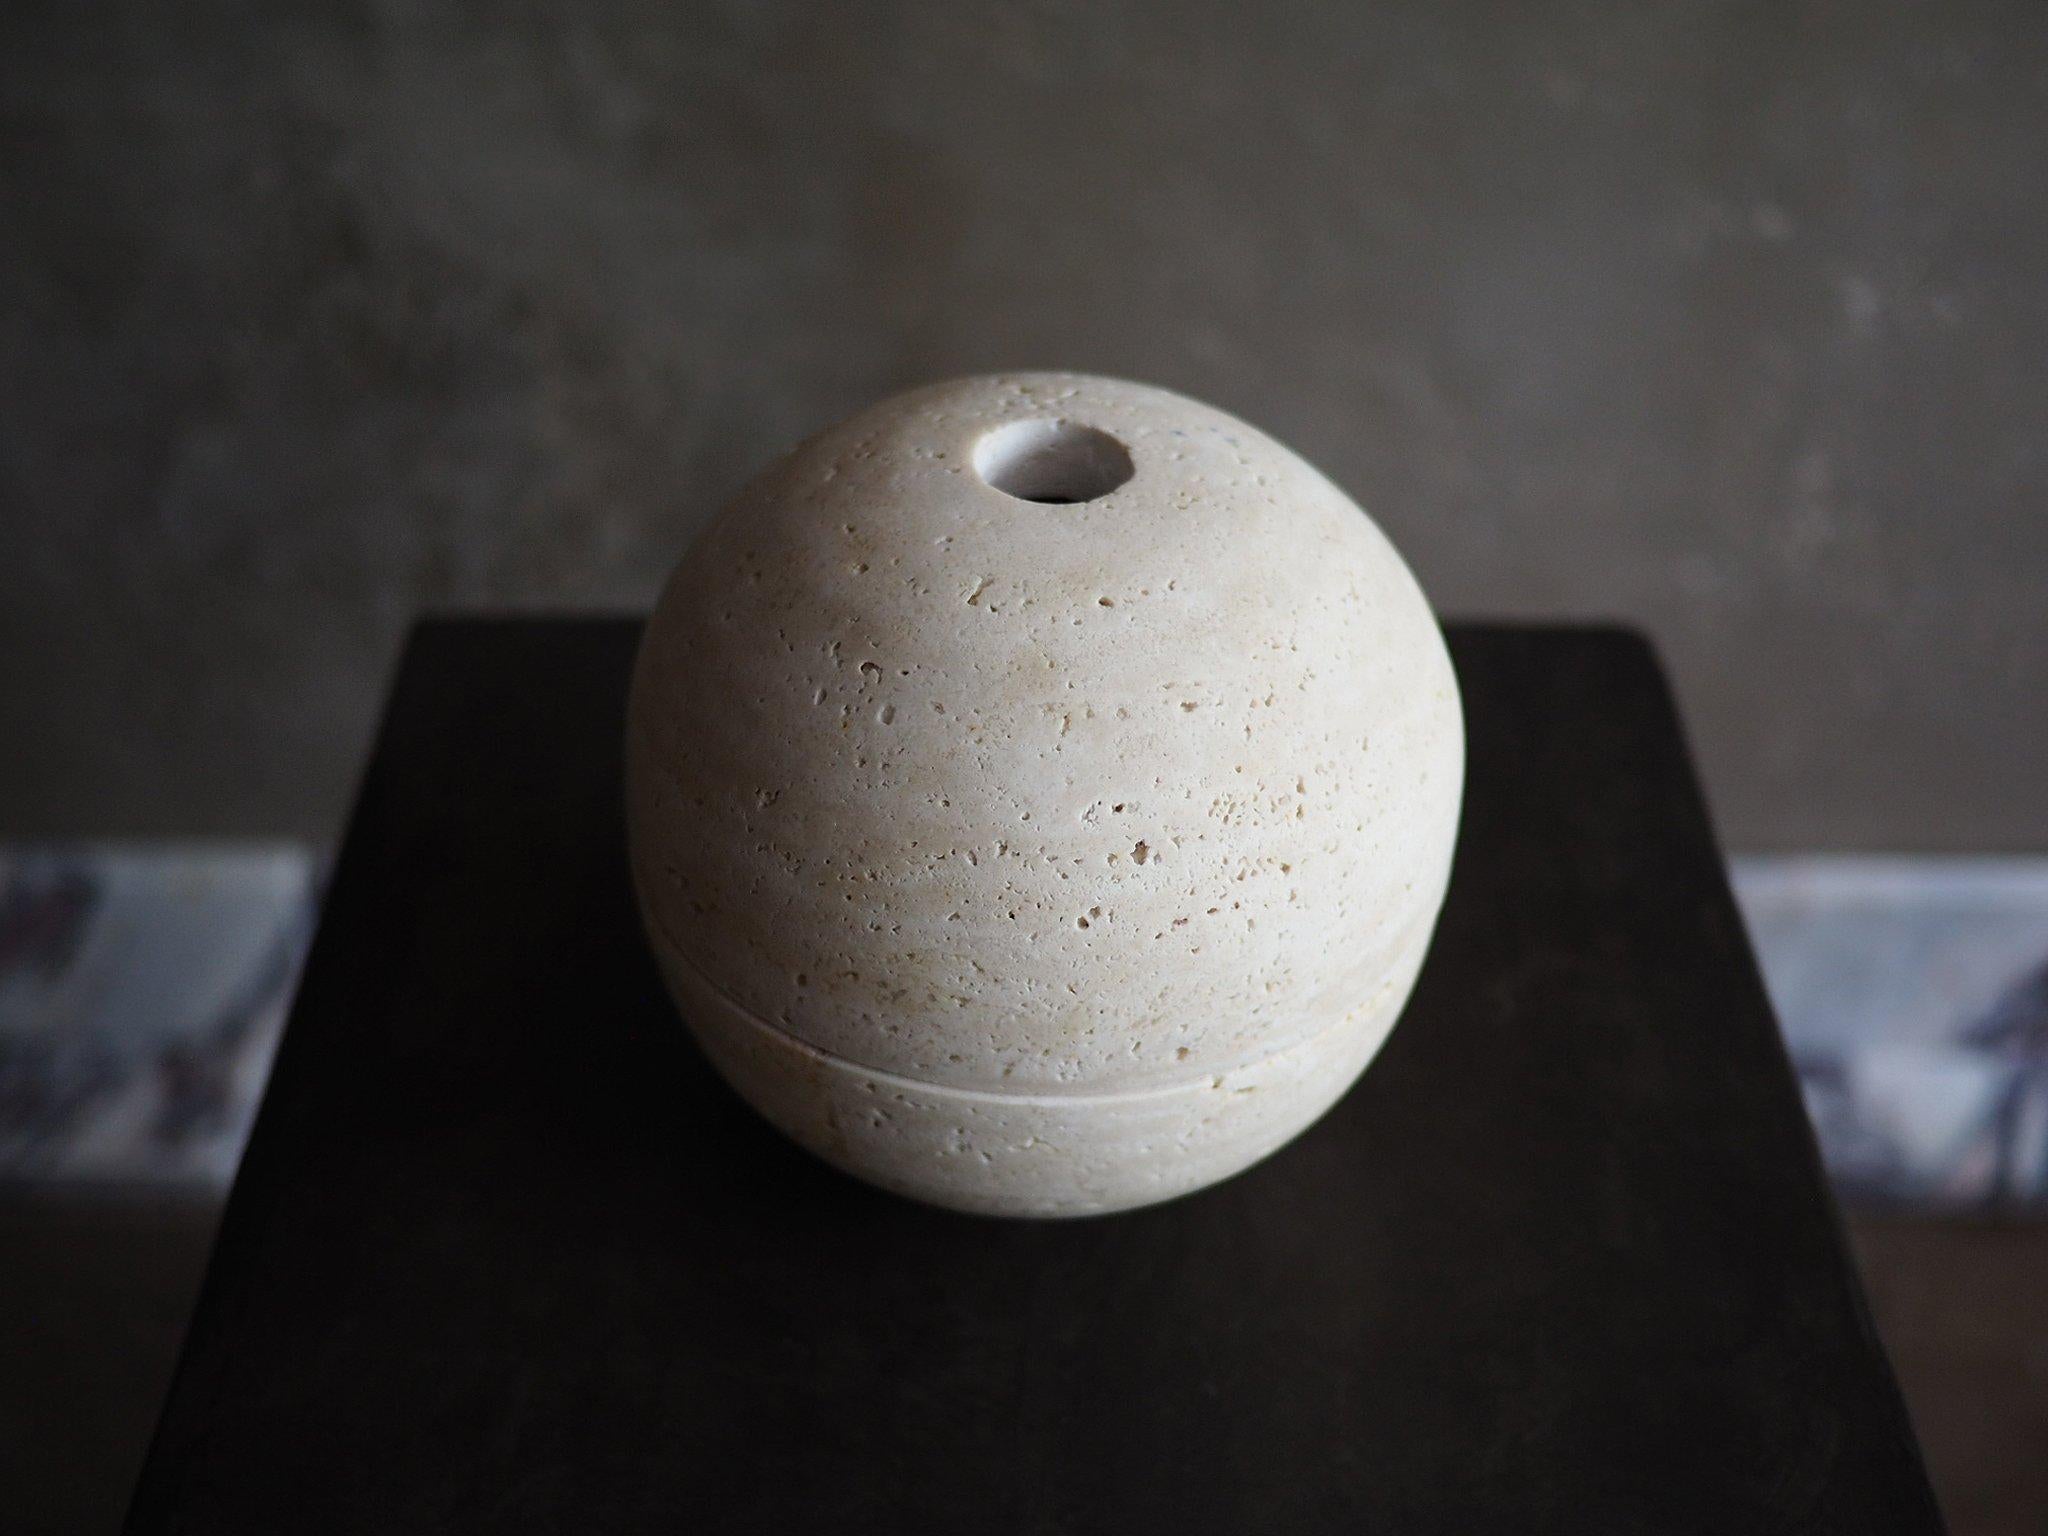 Sculpted from solid blocks of Unfilled Beige Travertine, Sphere Censer by Brendan Tadler. Minimalist in form, the Sphere Censer acts as a quiet object to stimulate creativity and focus when activated with incense or sage. Inside the sphere, burn